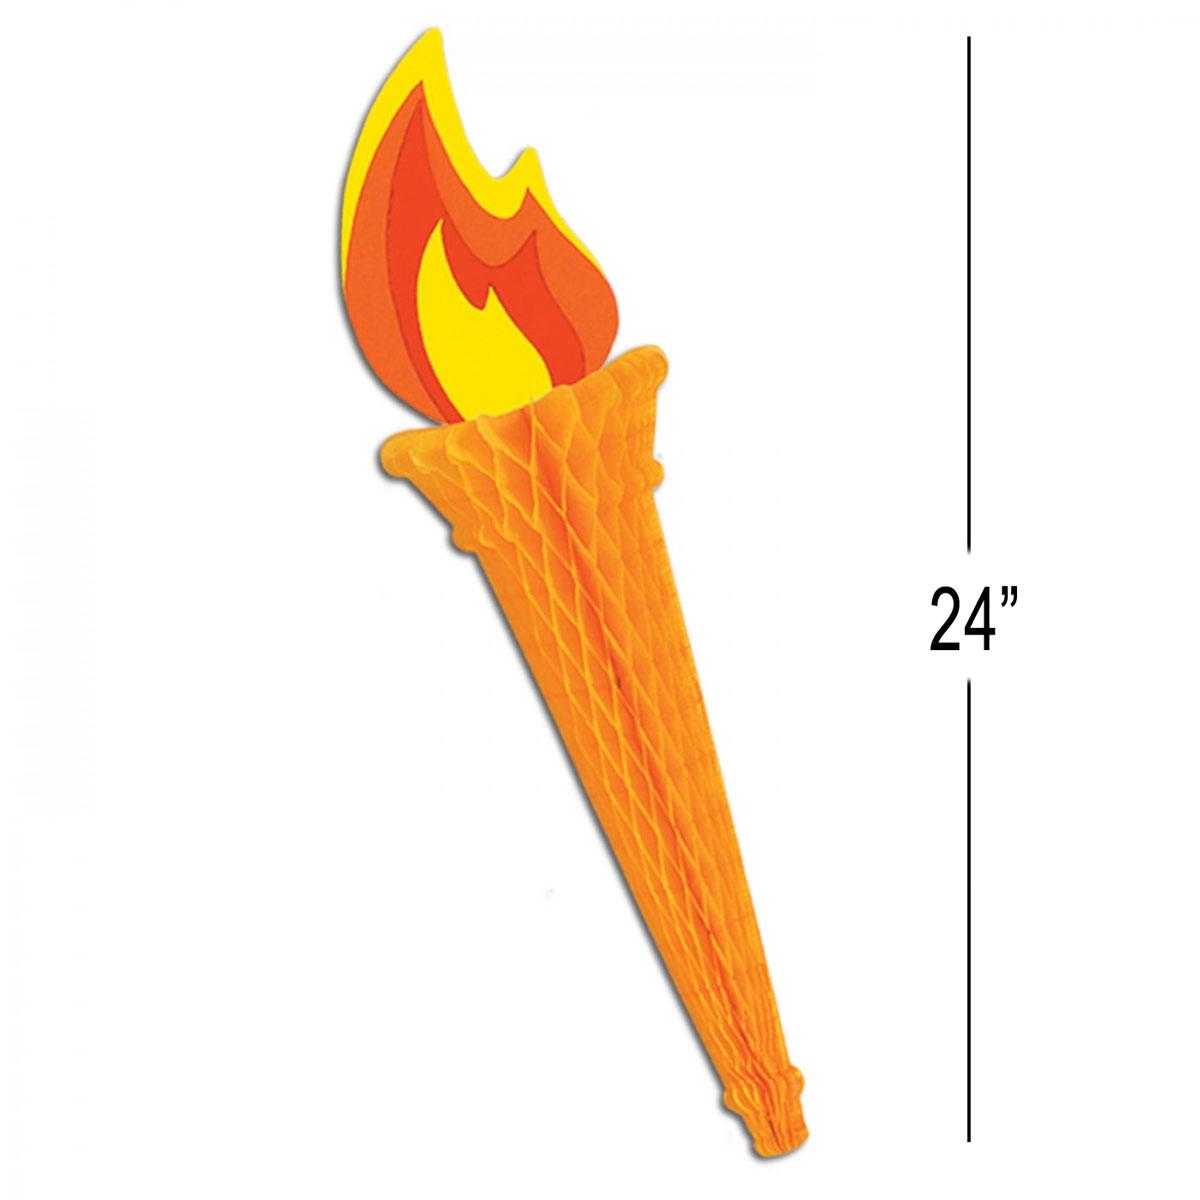 Honeycomb tissue Olympic Torch 24" tall by Beistle 55667 available here at Karnival Costumes online party shop